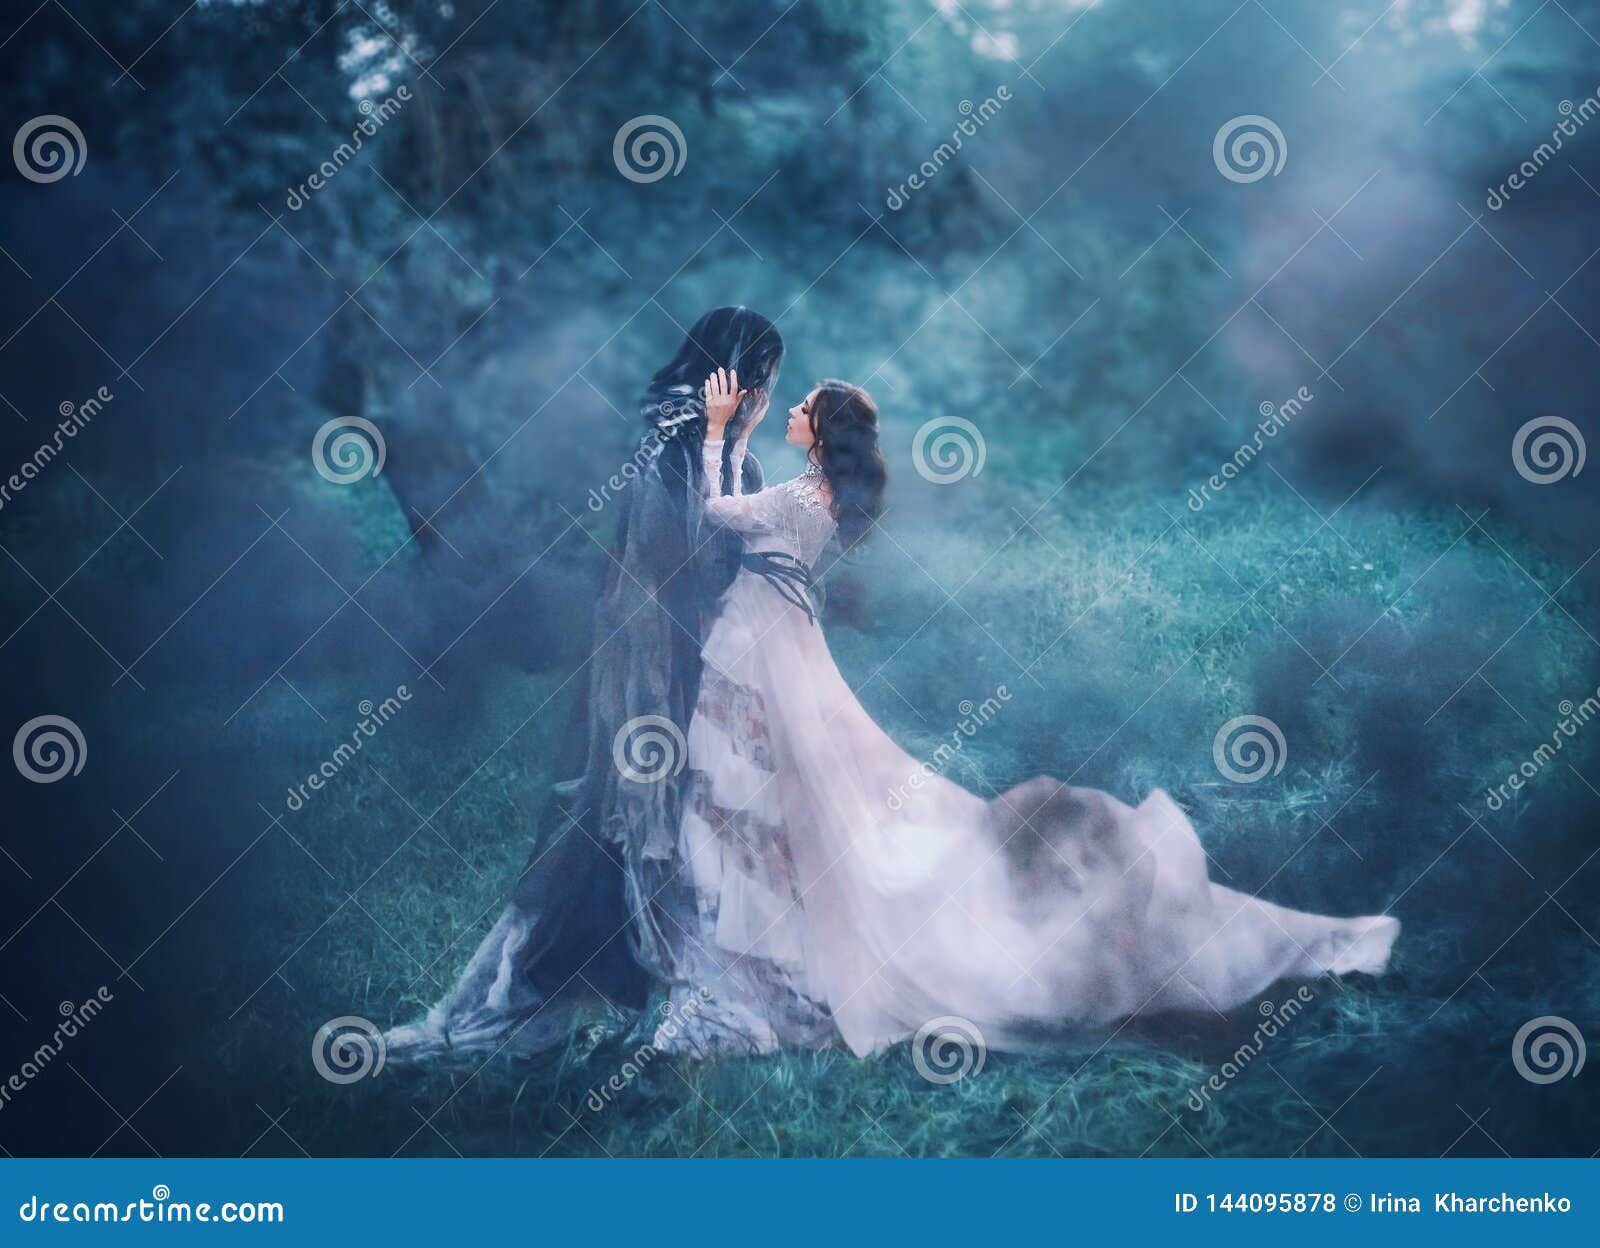 brunette girl ghost and spirit of nightly mysterious cold blue forest, lady in white vintage lace dress with long flying